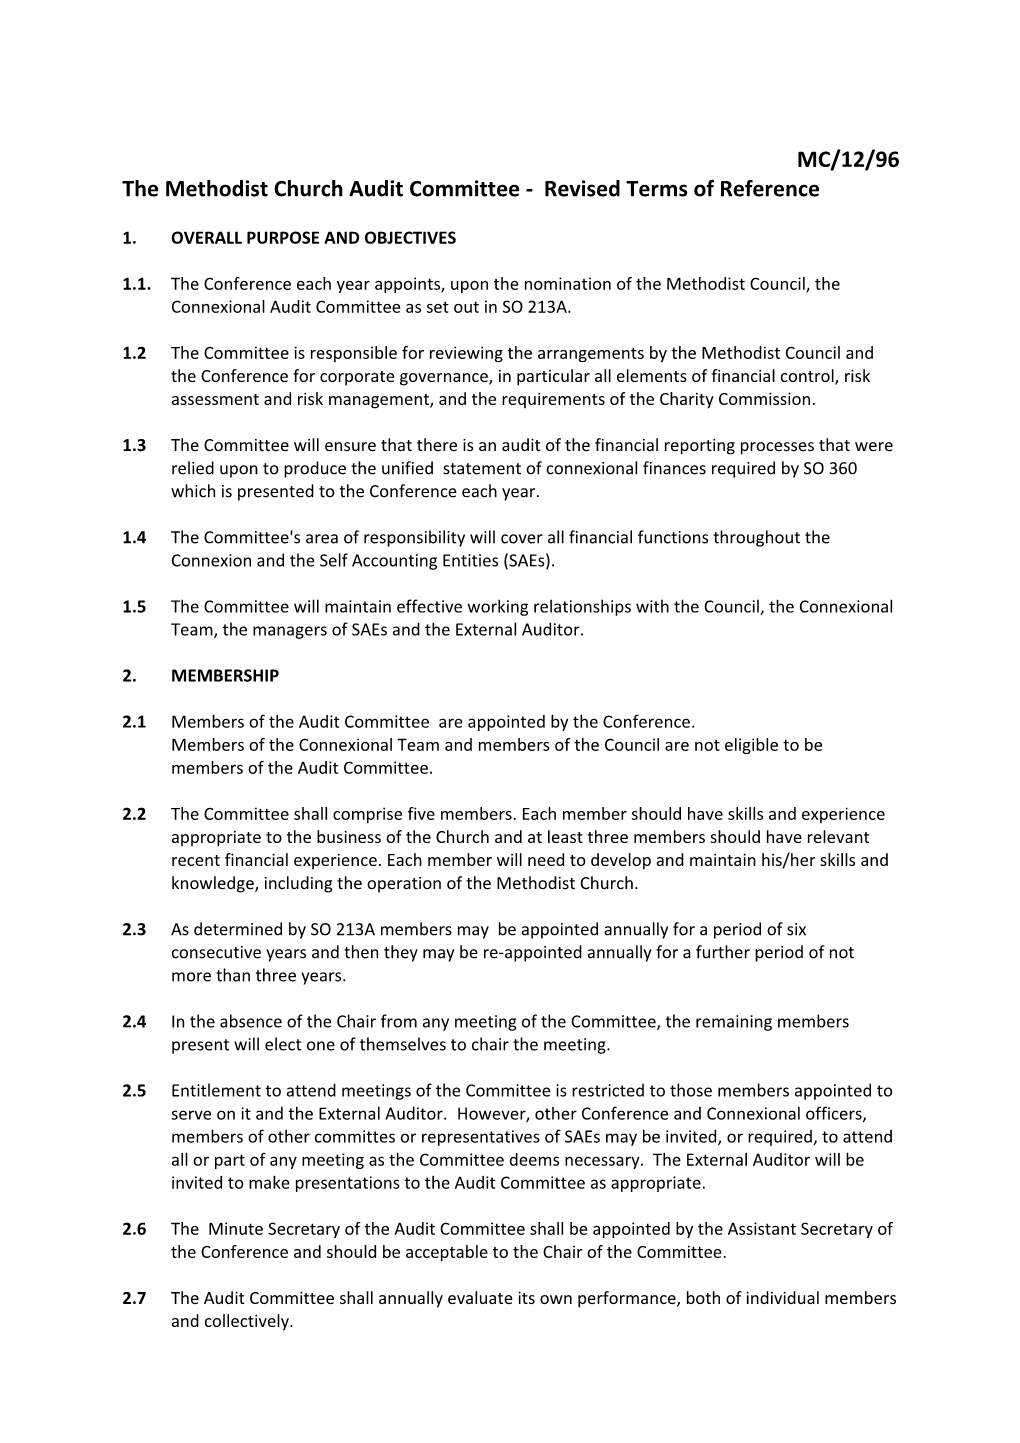 The Methodist Church Audit Committee - Revised Terms of Reference